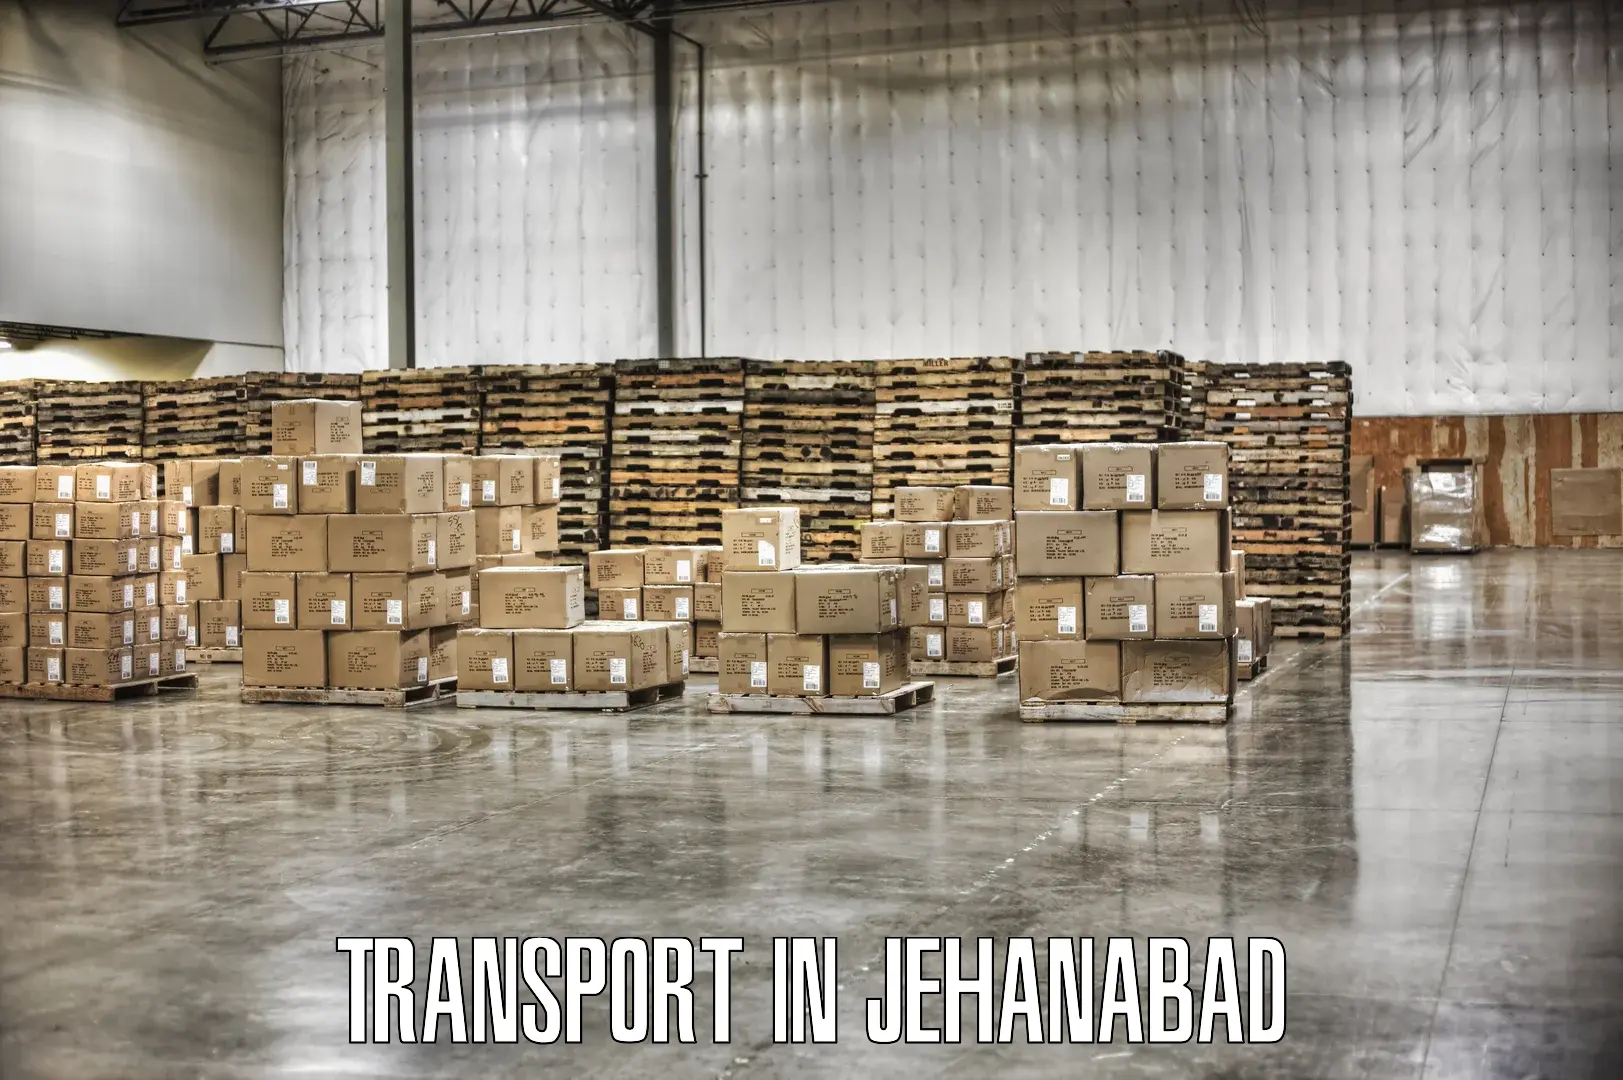 Container transport service in Jehanabad